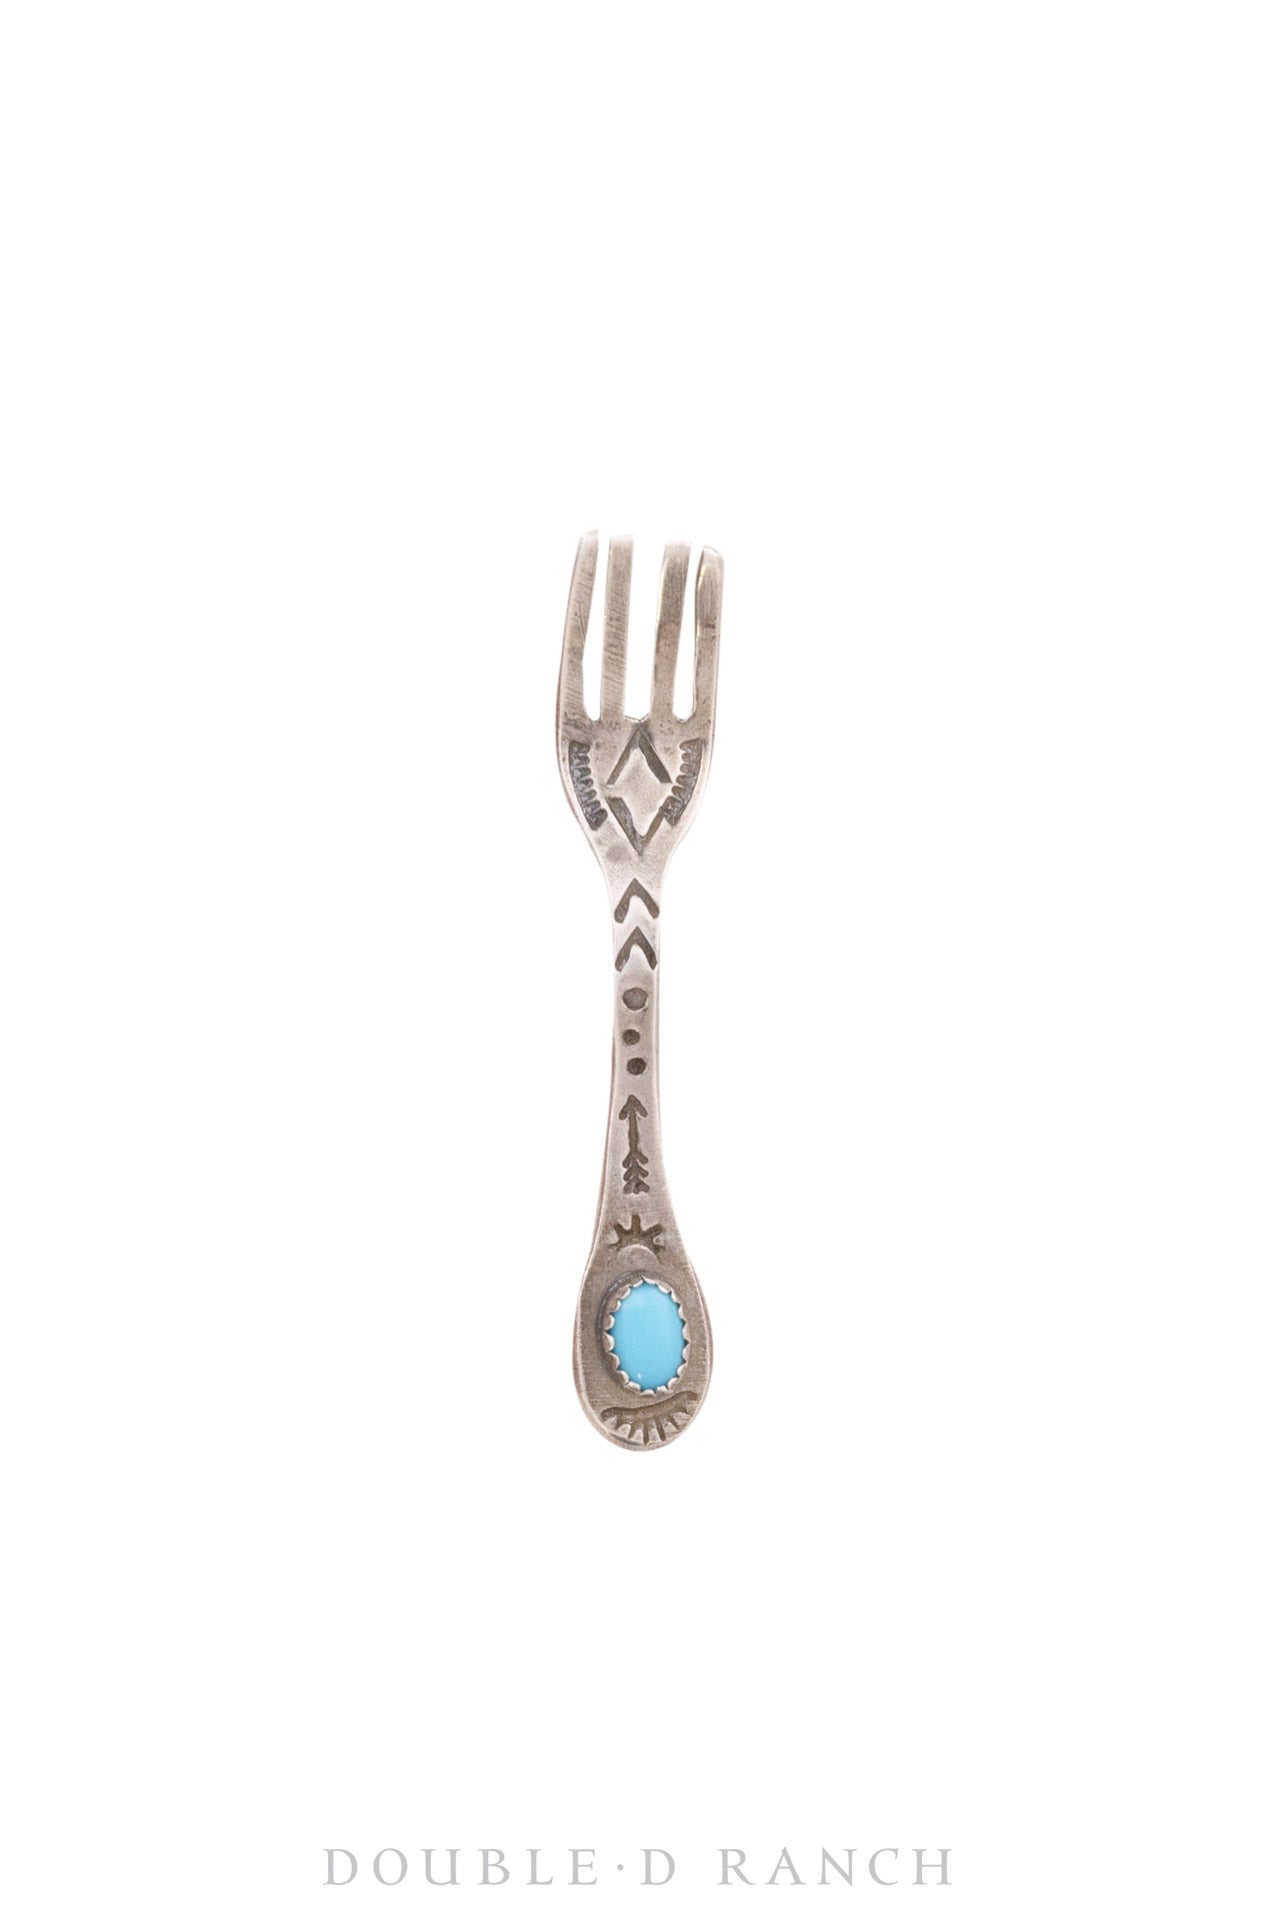 Pin, Hat, Novelty, Fork, Turquoise, Contemporary, 768